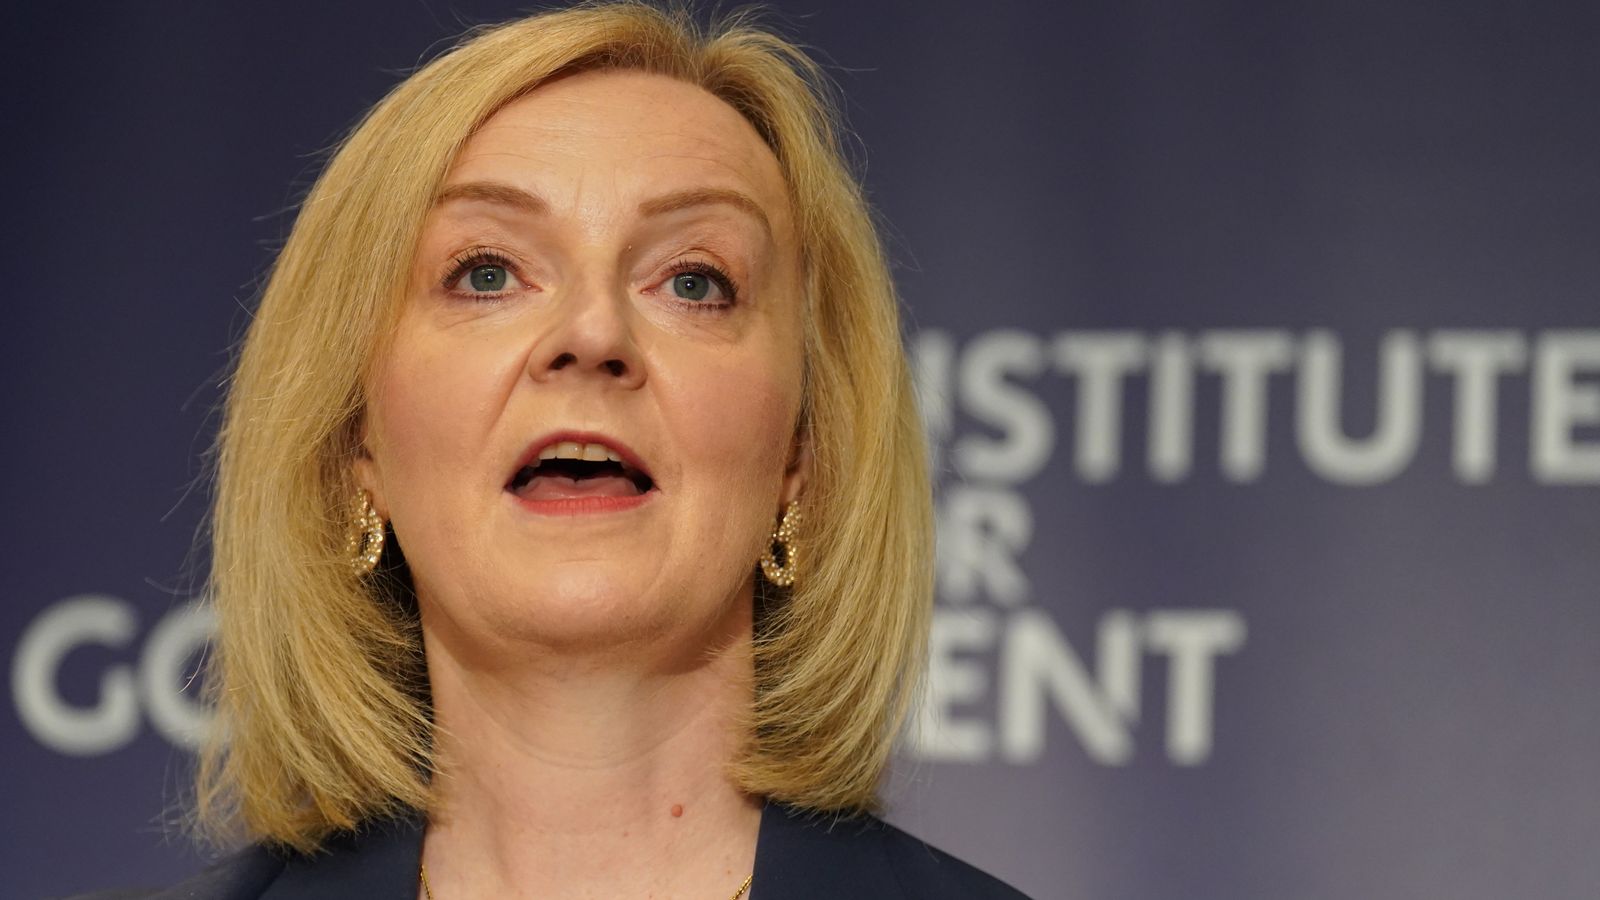 Unrepentant Liz Truss lays blame for economic woes elsewhere - but admits going too far, too fast